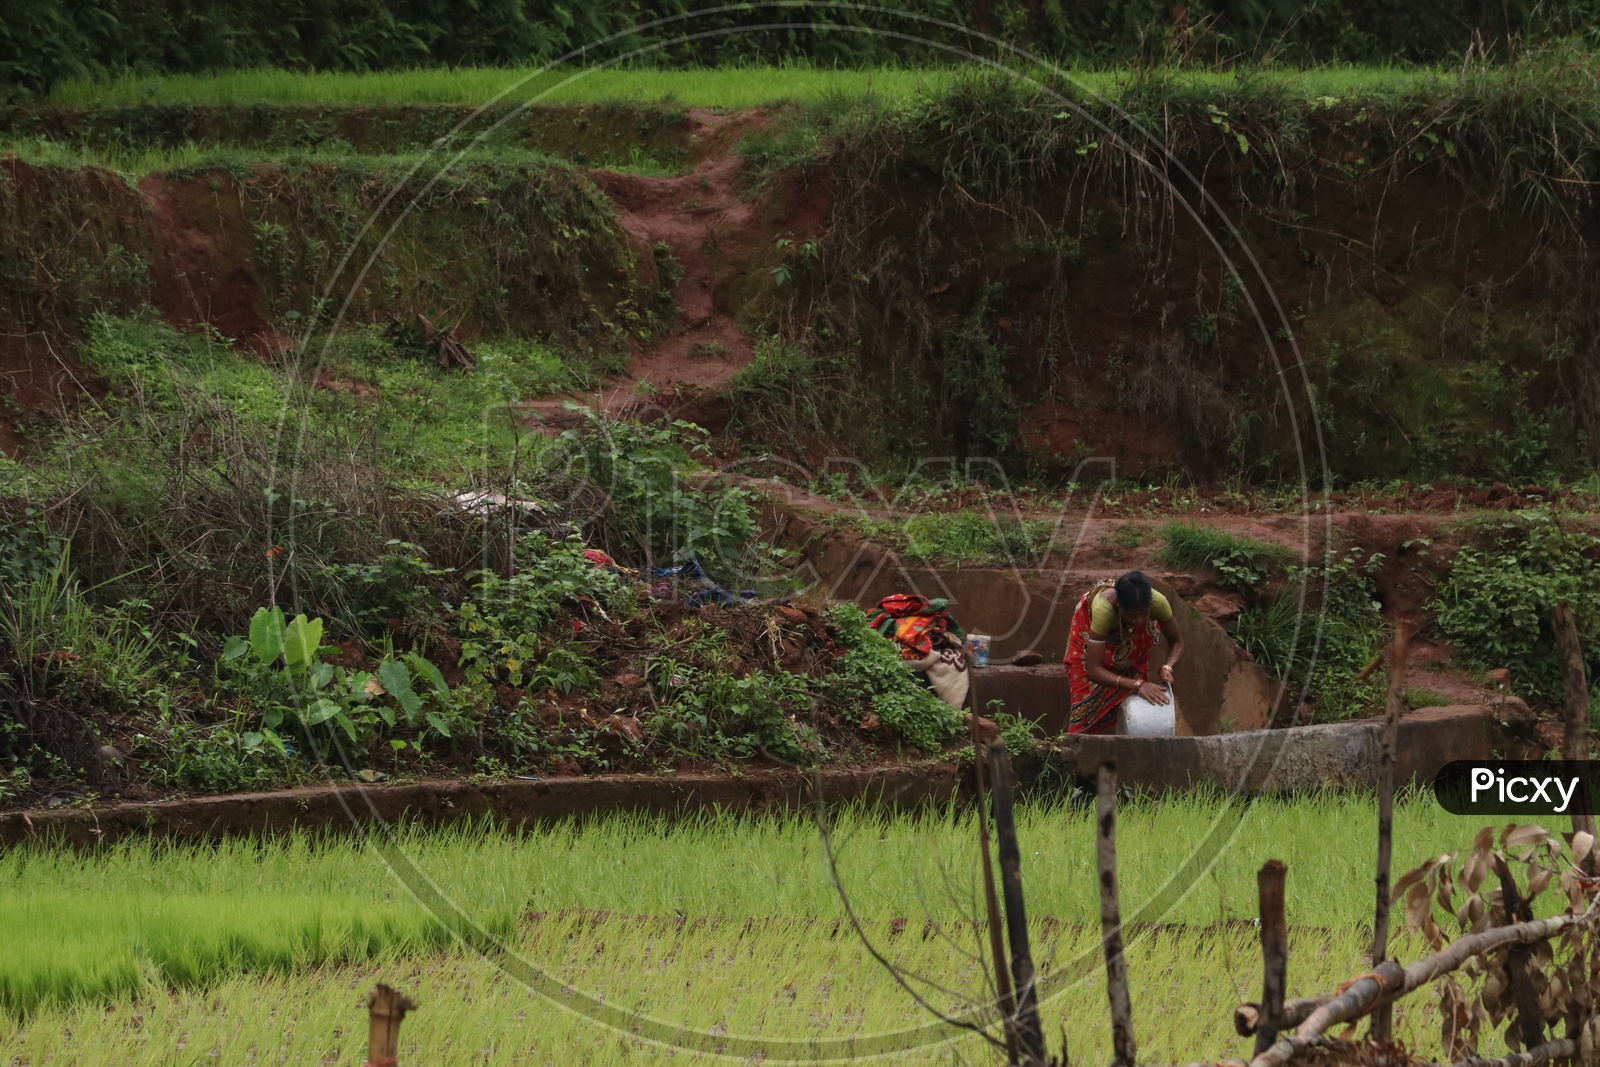 A Woman Washing Clothes by a Agricultural Field in Rural Village